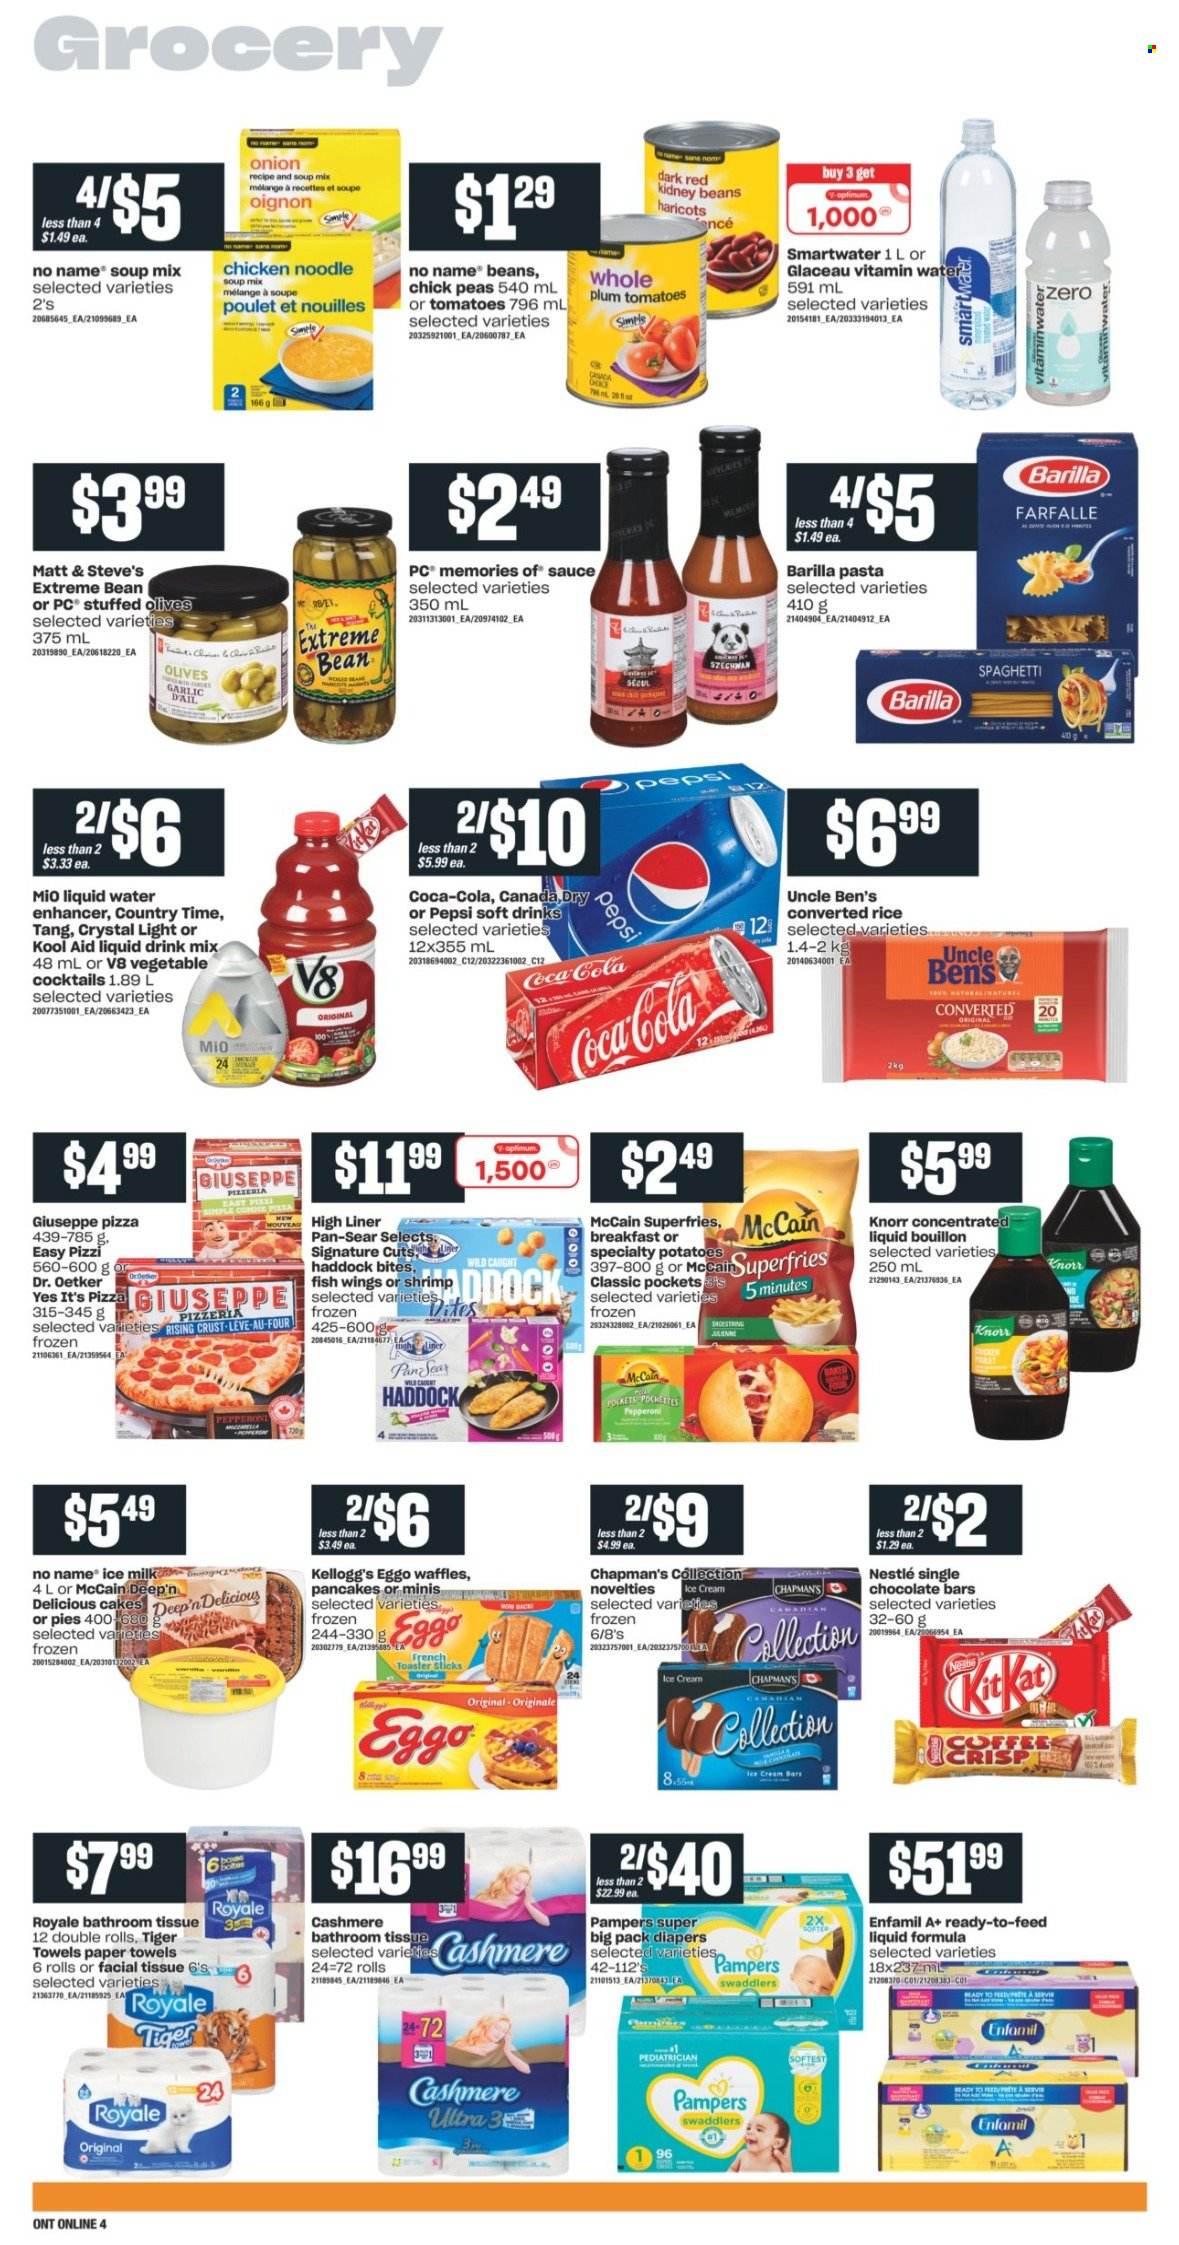 thumbnail - Independent Flyer - October 28, 2021 - November 03, 2021 - Sales products - cake, waffles, garlic, potatoes, haddock, fish, shrimps, No Name, spaghetti, pizza, soup mix, soup, pasta, sauce, noodles cup, Barilla, noodles, pepperoni, Dr. Oetker, milk, ice cream, McCain, potato fries, Kellogg's, chocolate bar, bouillon, kidney beans, Uncle Ben's, rice, Coca-Cola, Pepsi, soft drink, Country Time, Smartwater, Enfamil, nappies, bath tissue, kitchen towels, paper towels, pan, Knorr, Nestlé, kool aid, Pampers, olives. Page 8.